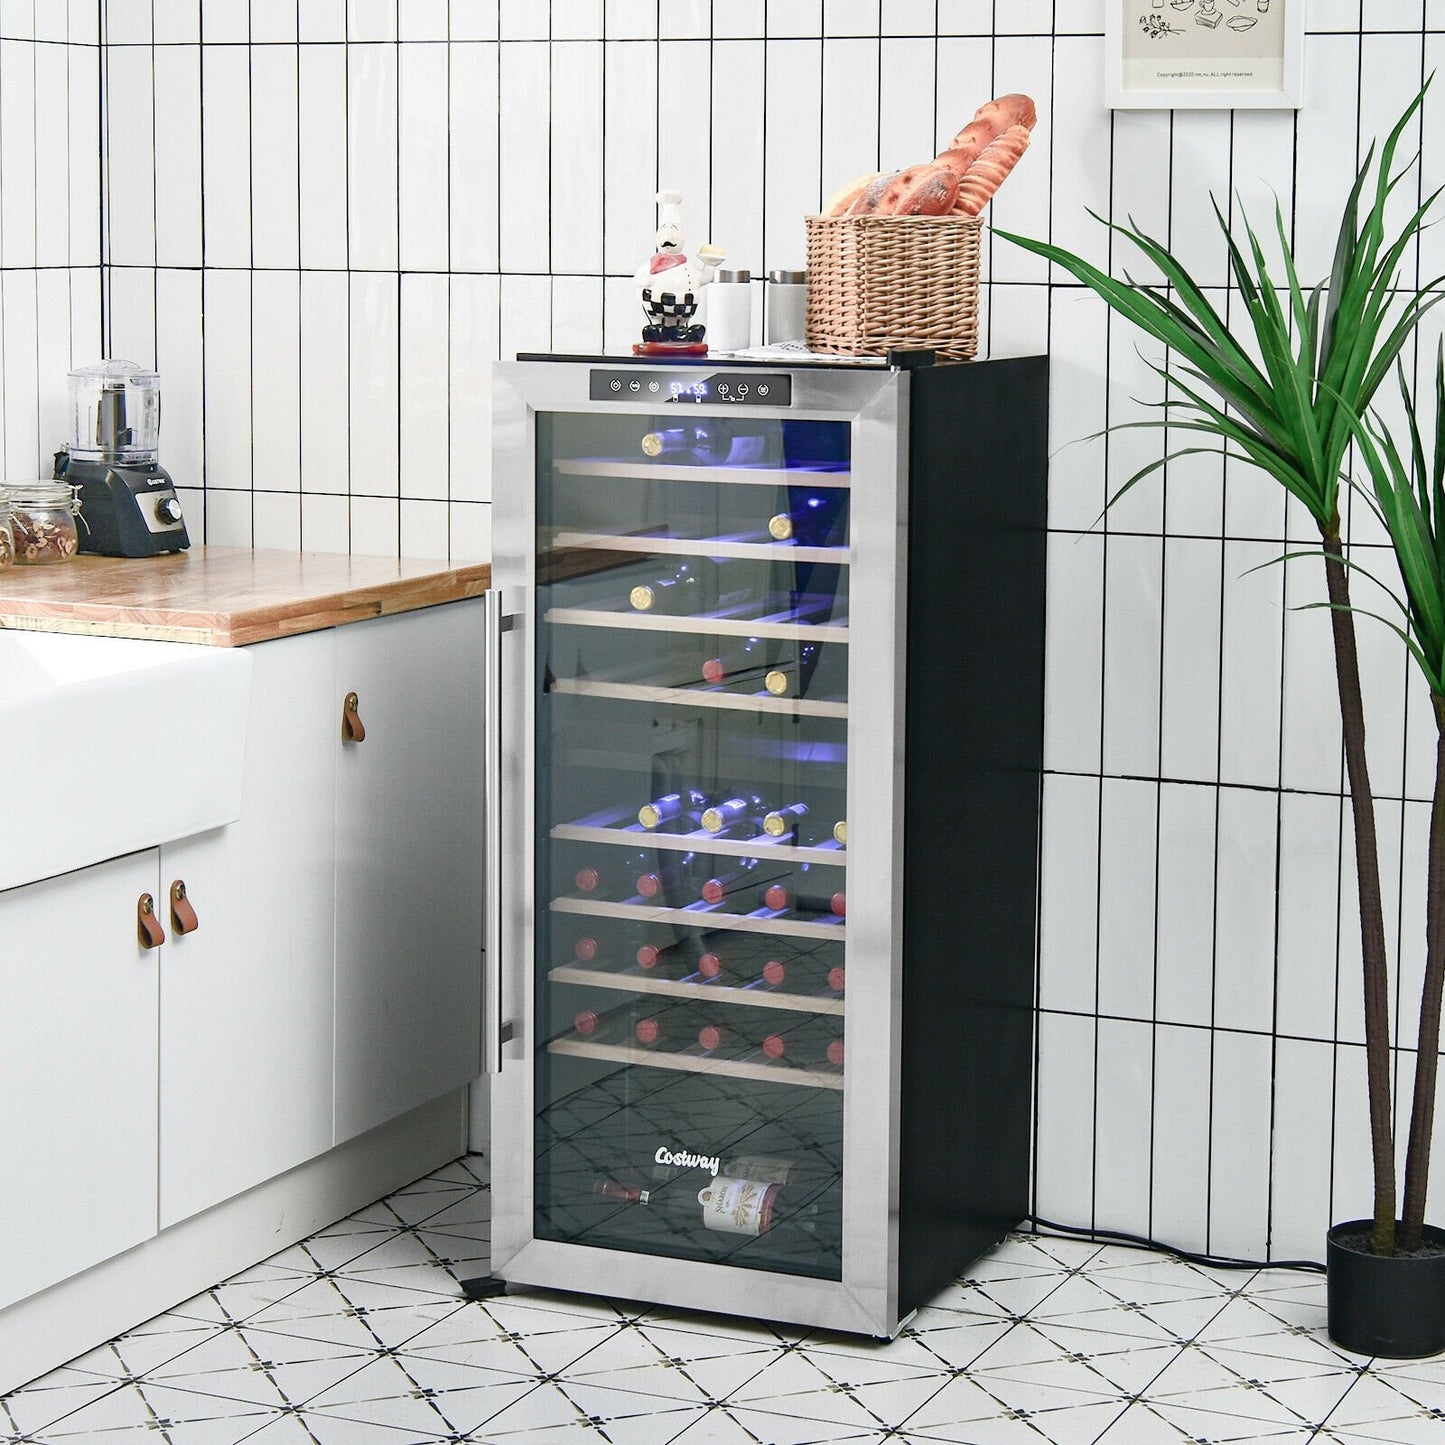 43 Bottle Wine Cooler Refrigerator Dual Zone Temperature Control with 8 Shelves, Black